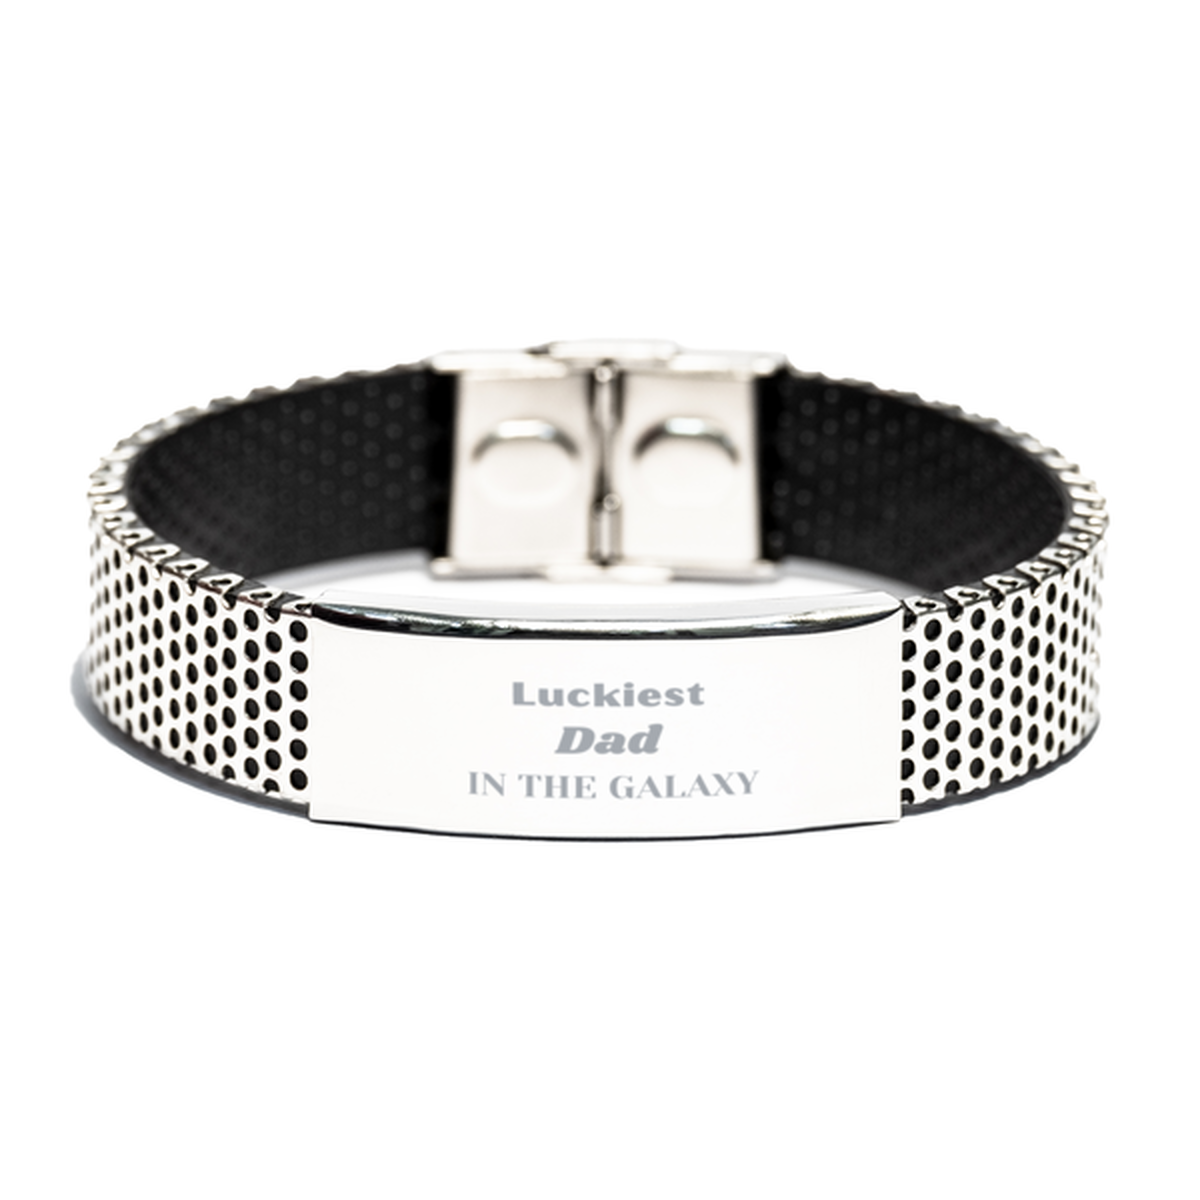 Luckiest Dad in the Galaxy, To My Dad Engraved Gifts, Christmas Dad Stainless Steel Bracelet Gifts, X-mas Birthday Unique Gifts For Dad Men Women